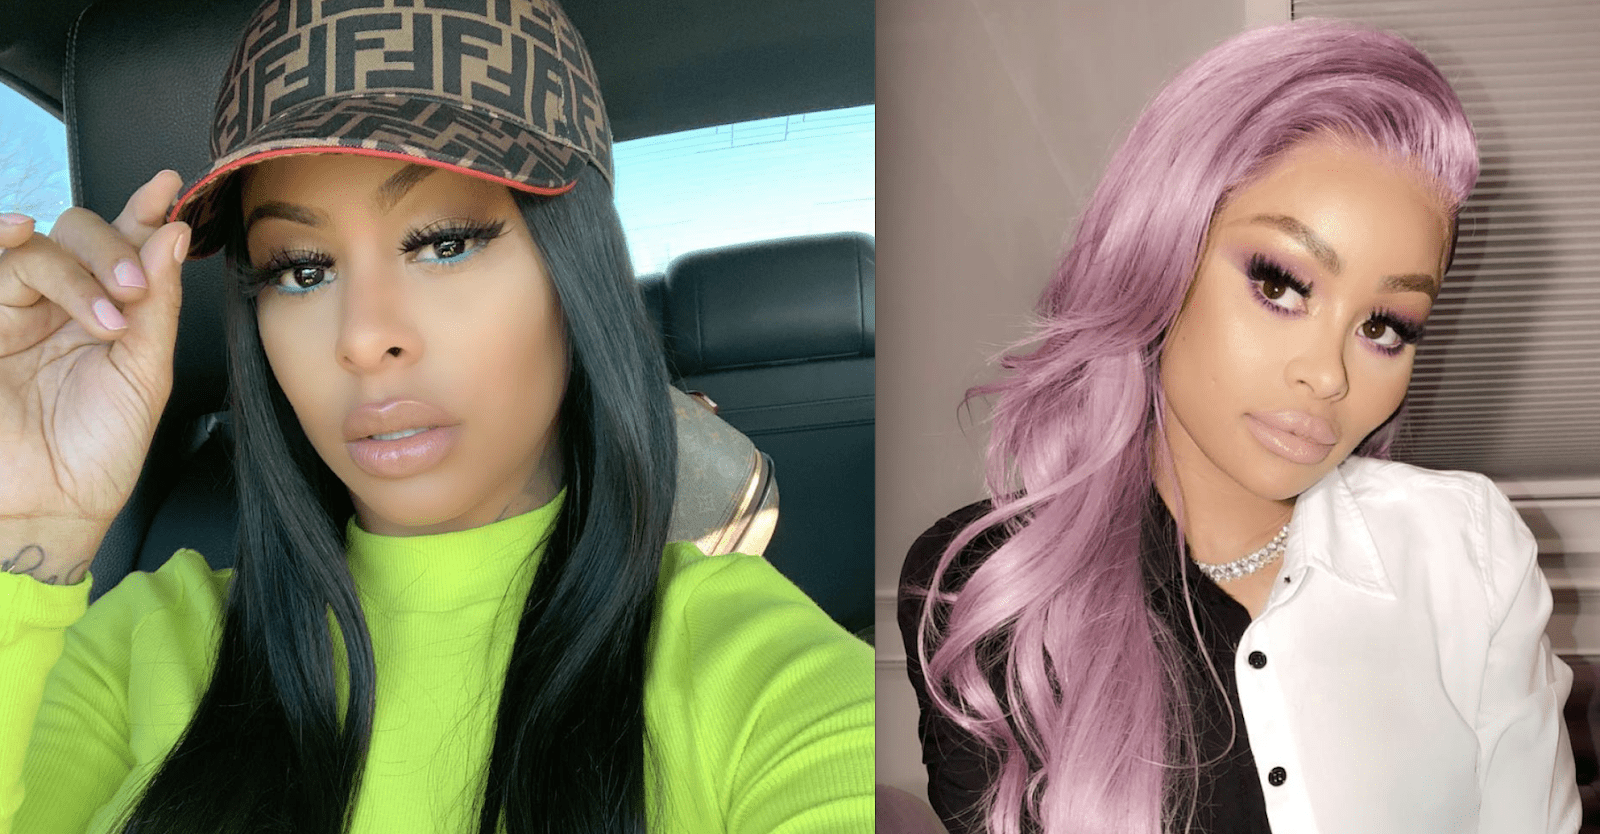 Blac Chyna And Alexis Skyy, Spotted Twinning In The Same Fashion Nova Outfit - Fans Cannot Tell Them Apart!